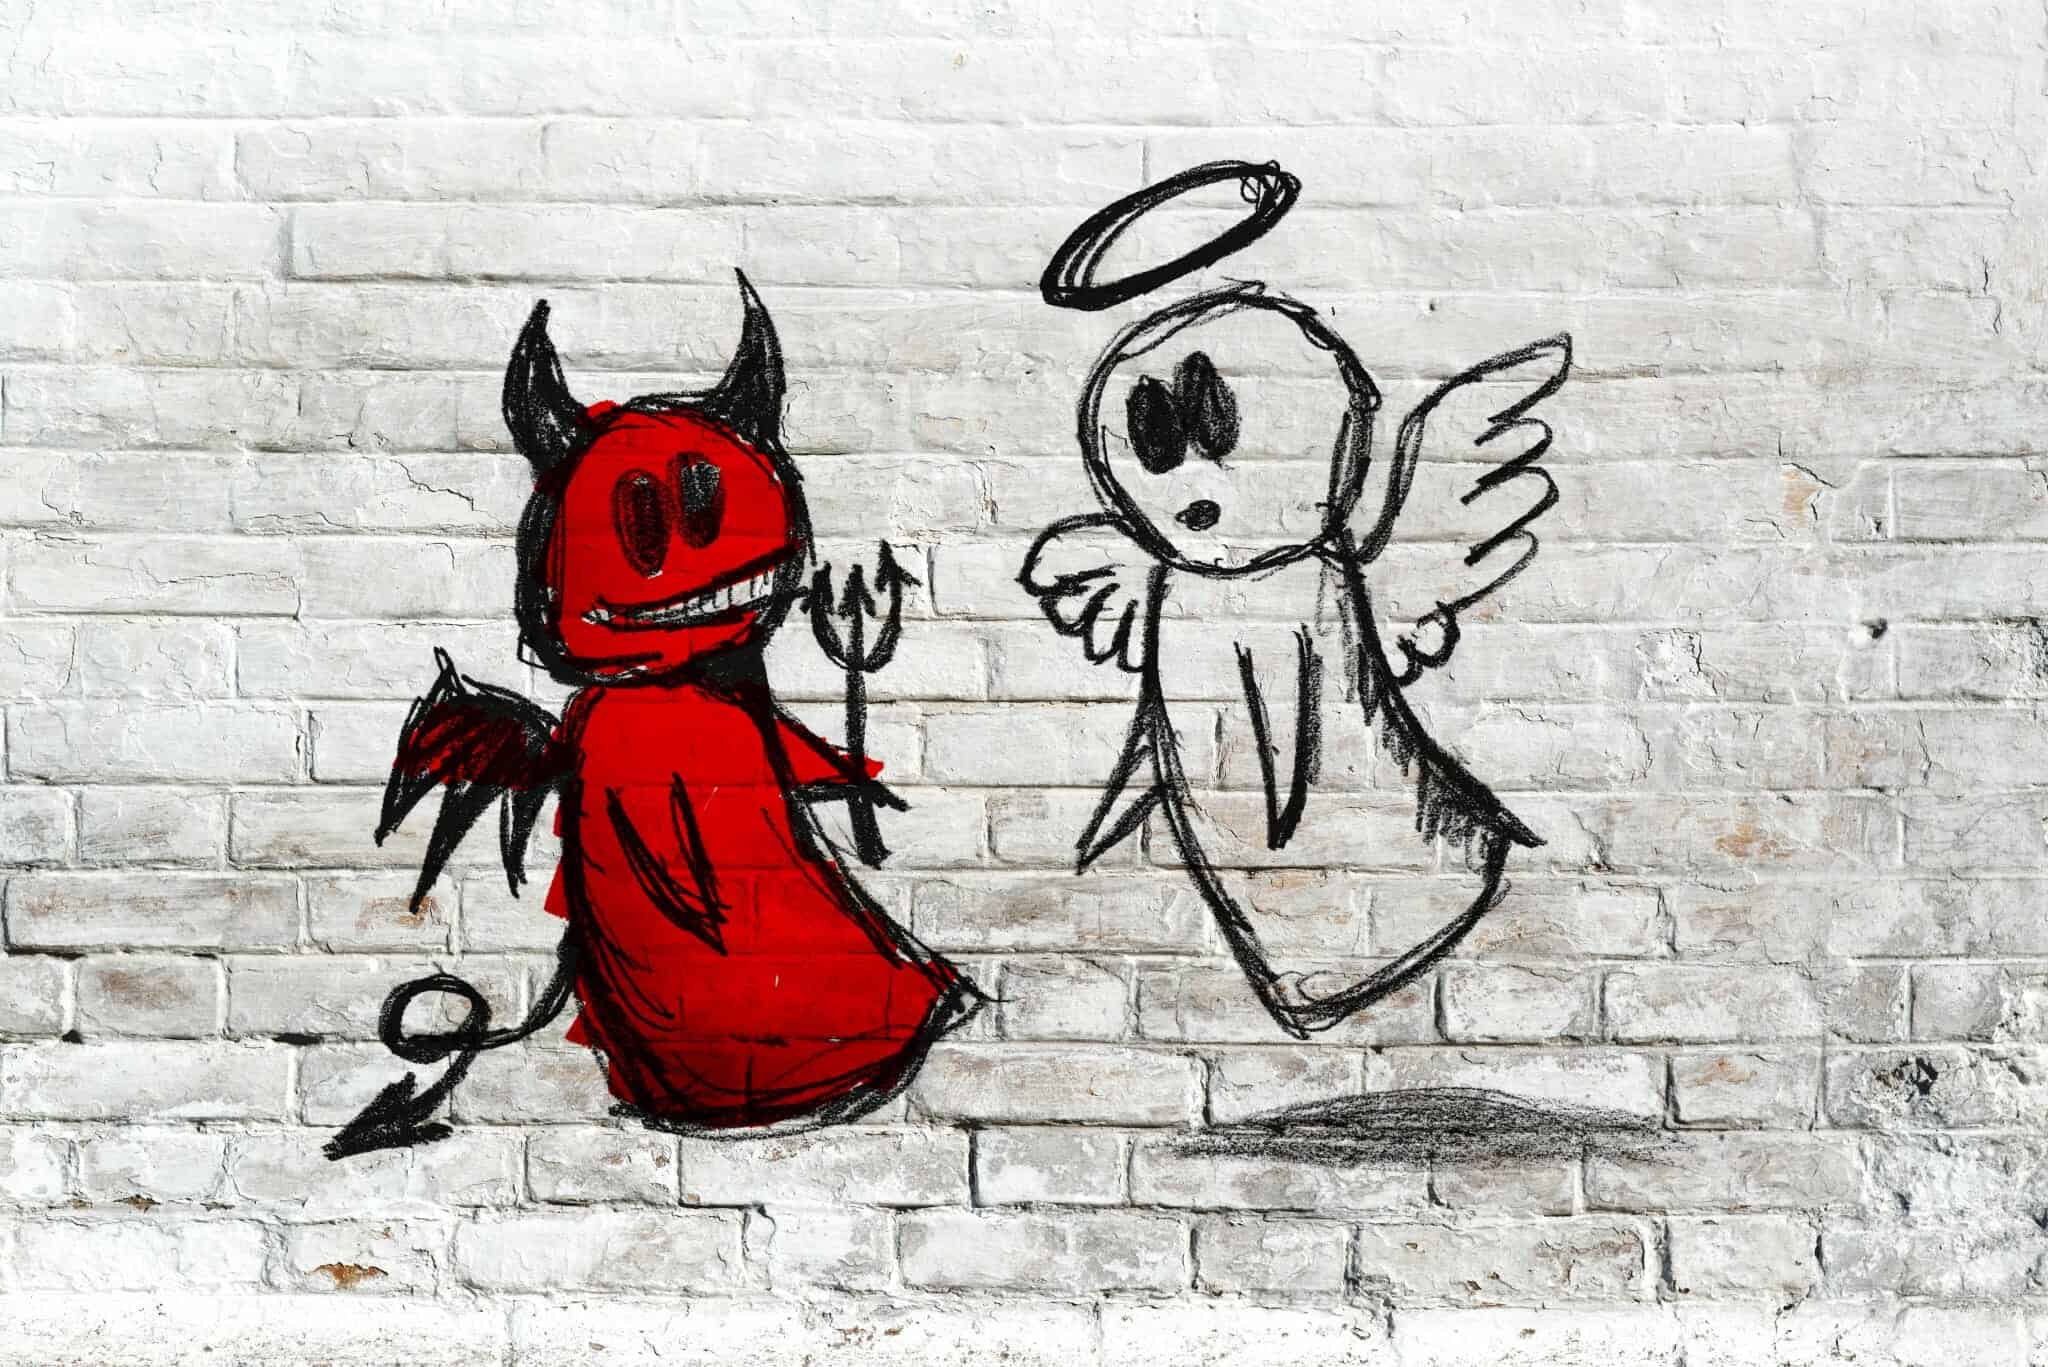 White angel and red devil drawn on a brick wall.